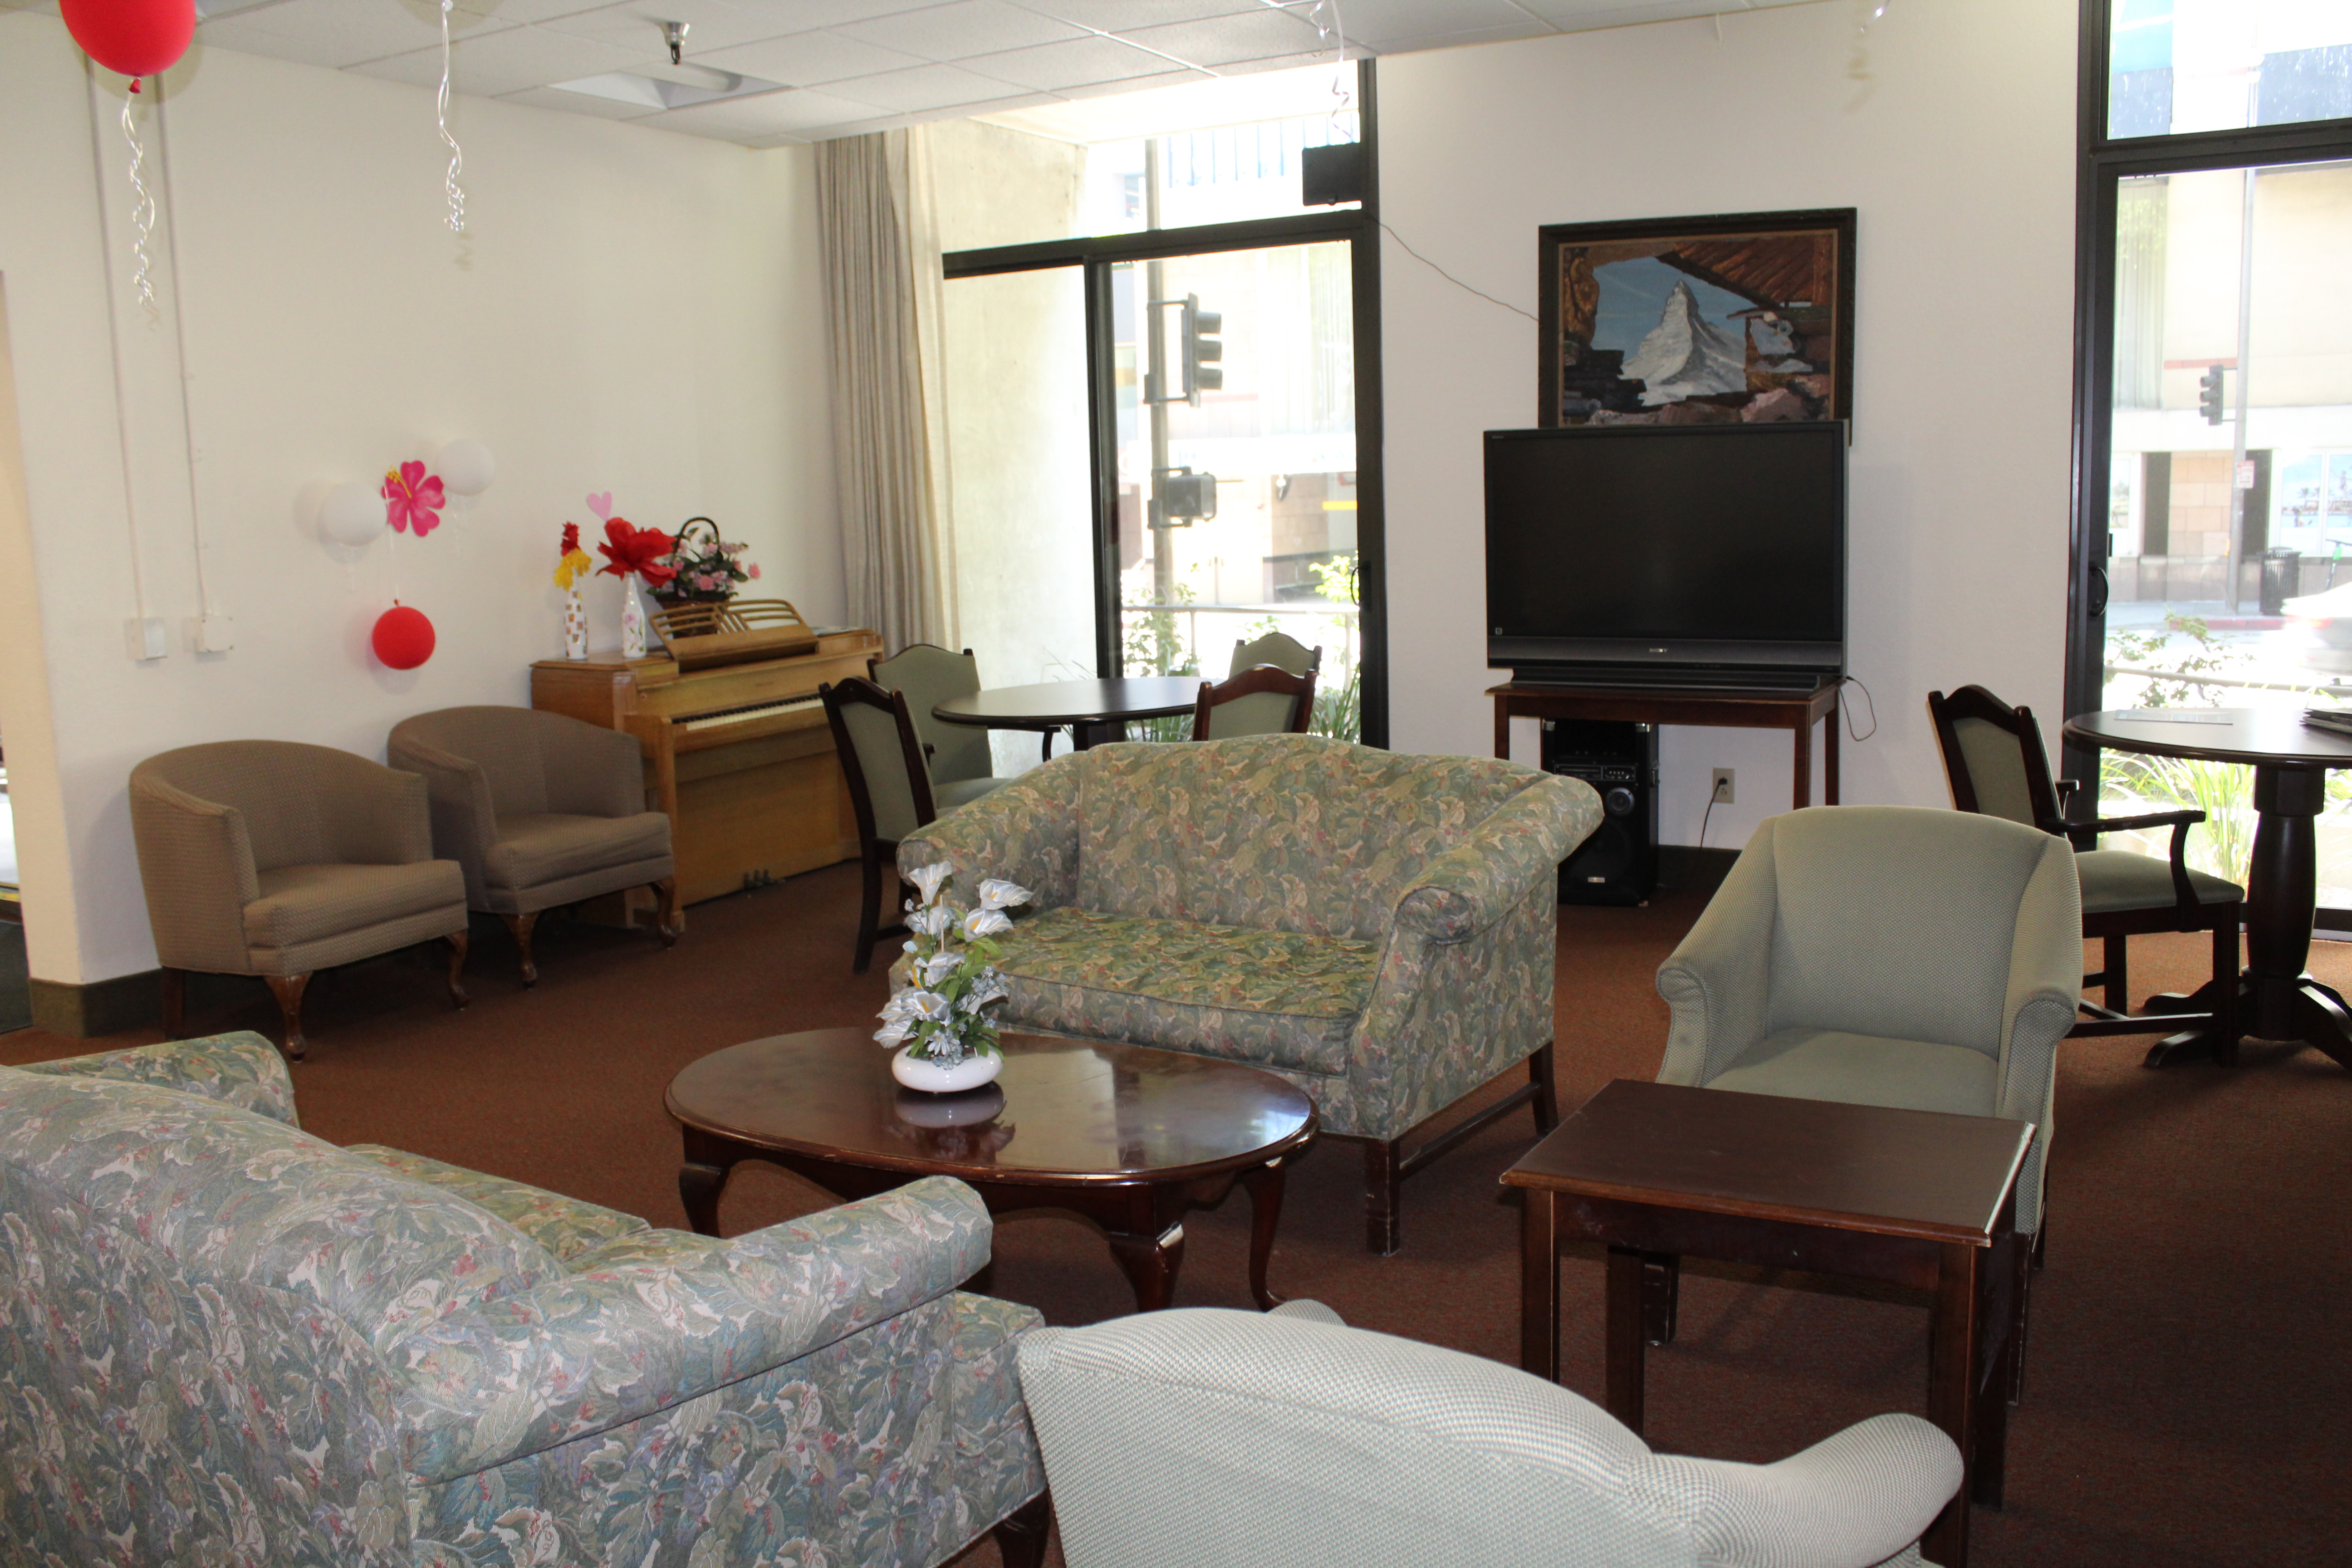 Inside view of a community room. Room contains talll windows with a street view. There is a piano and a tv for entertainment. Furniture consists of sofas, coffee table and two wooden tables with matching chairs.